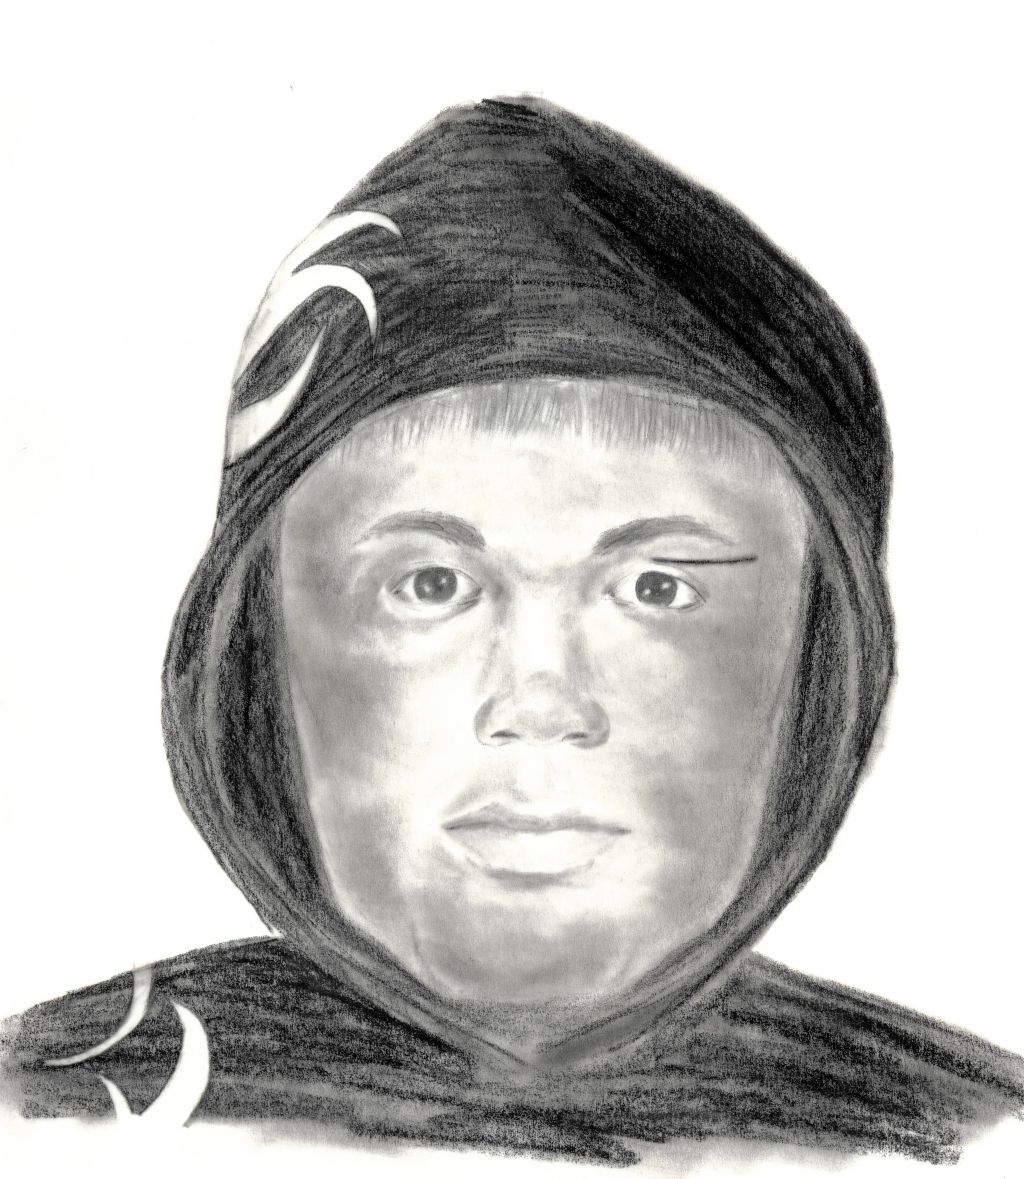 Sketch released by RCMP of suspect believed to be involved in home invasion. 